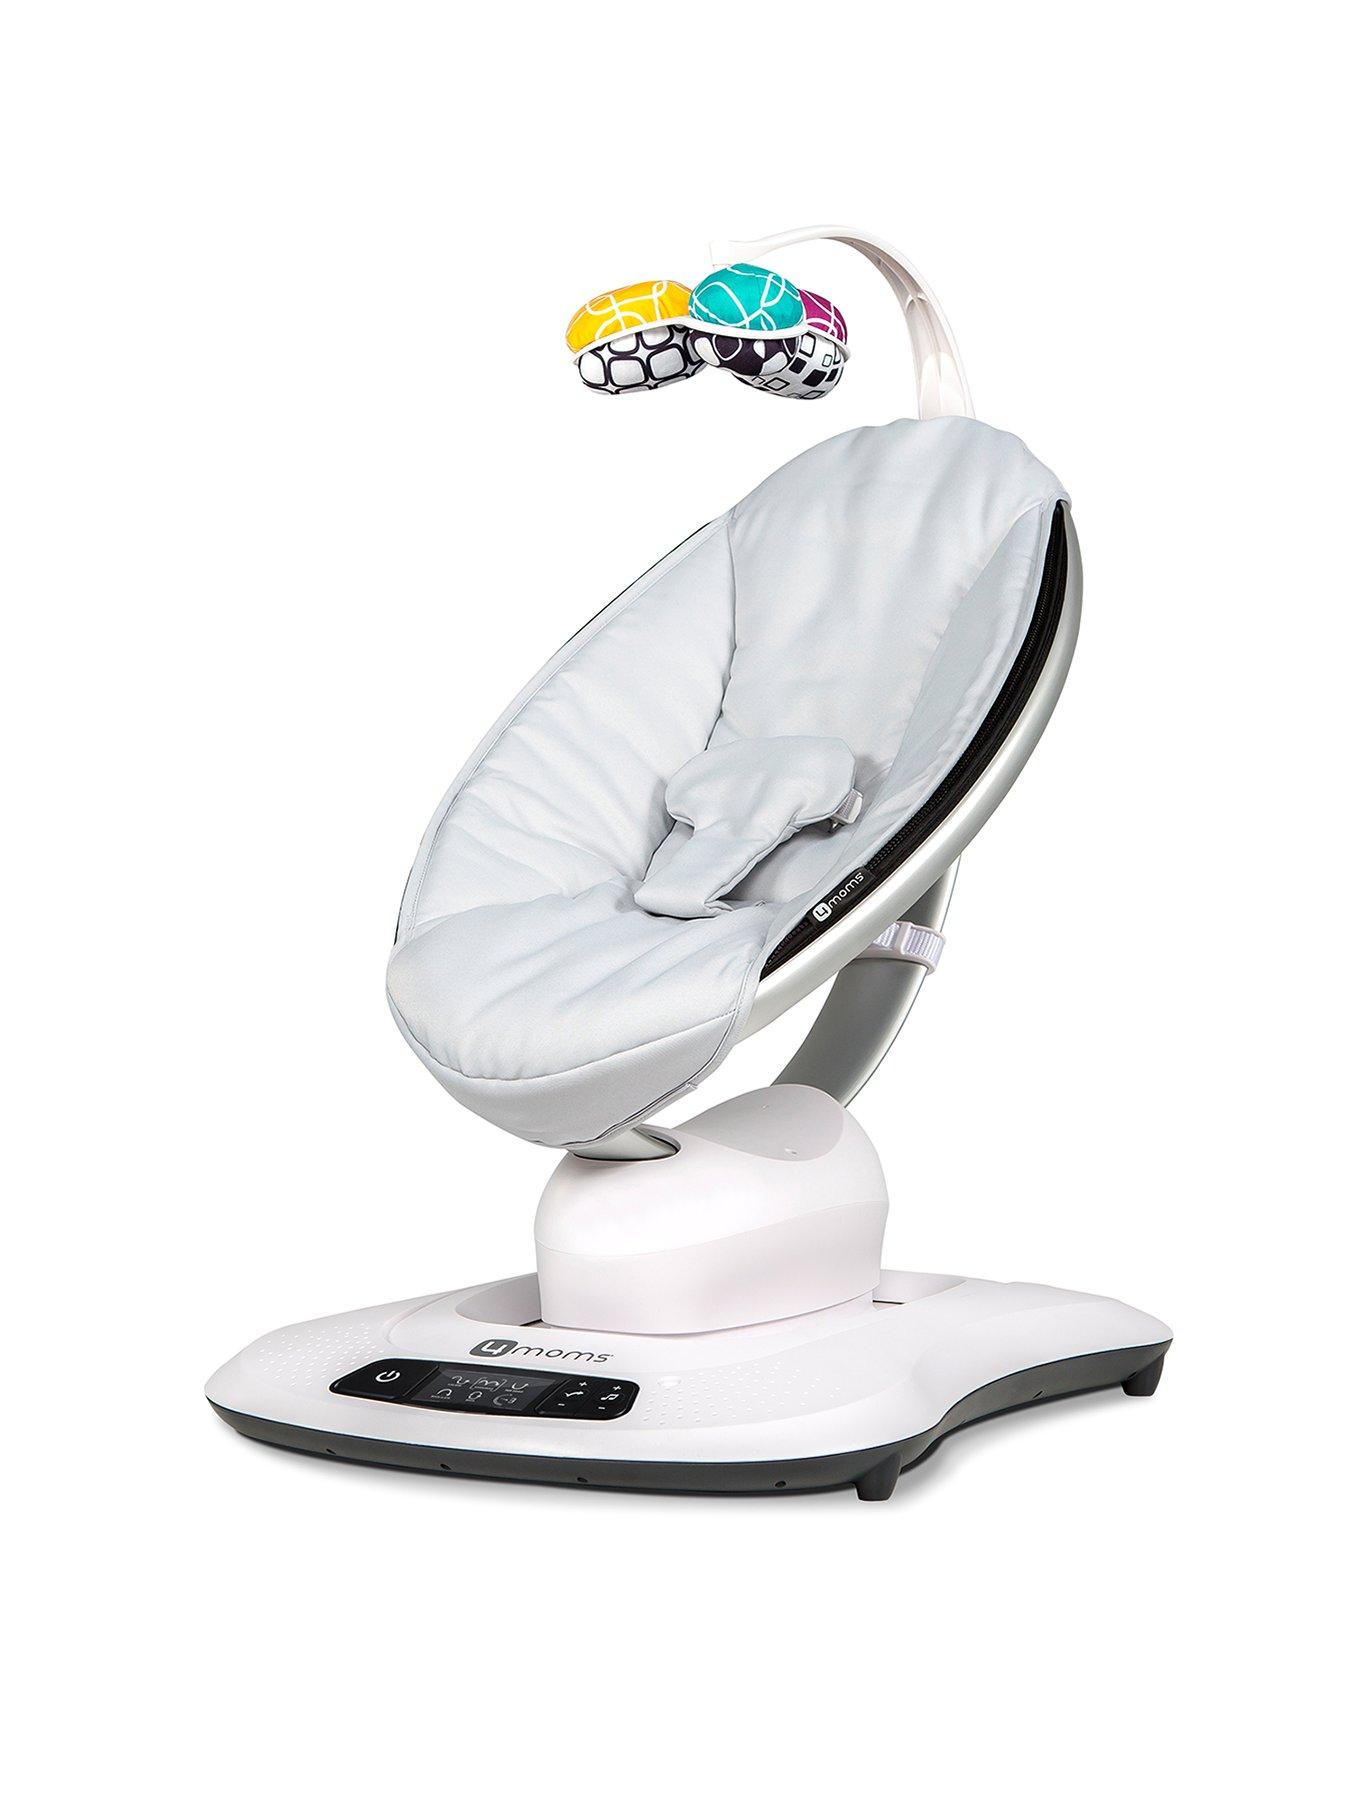 mamaroo for adults